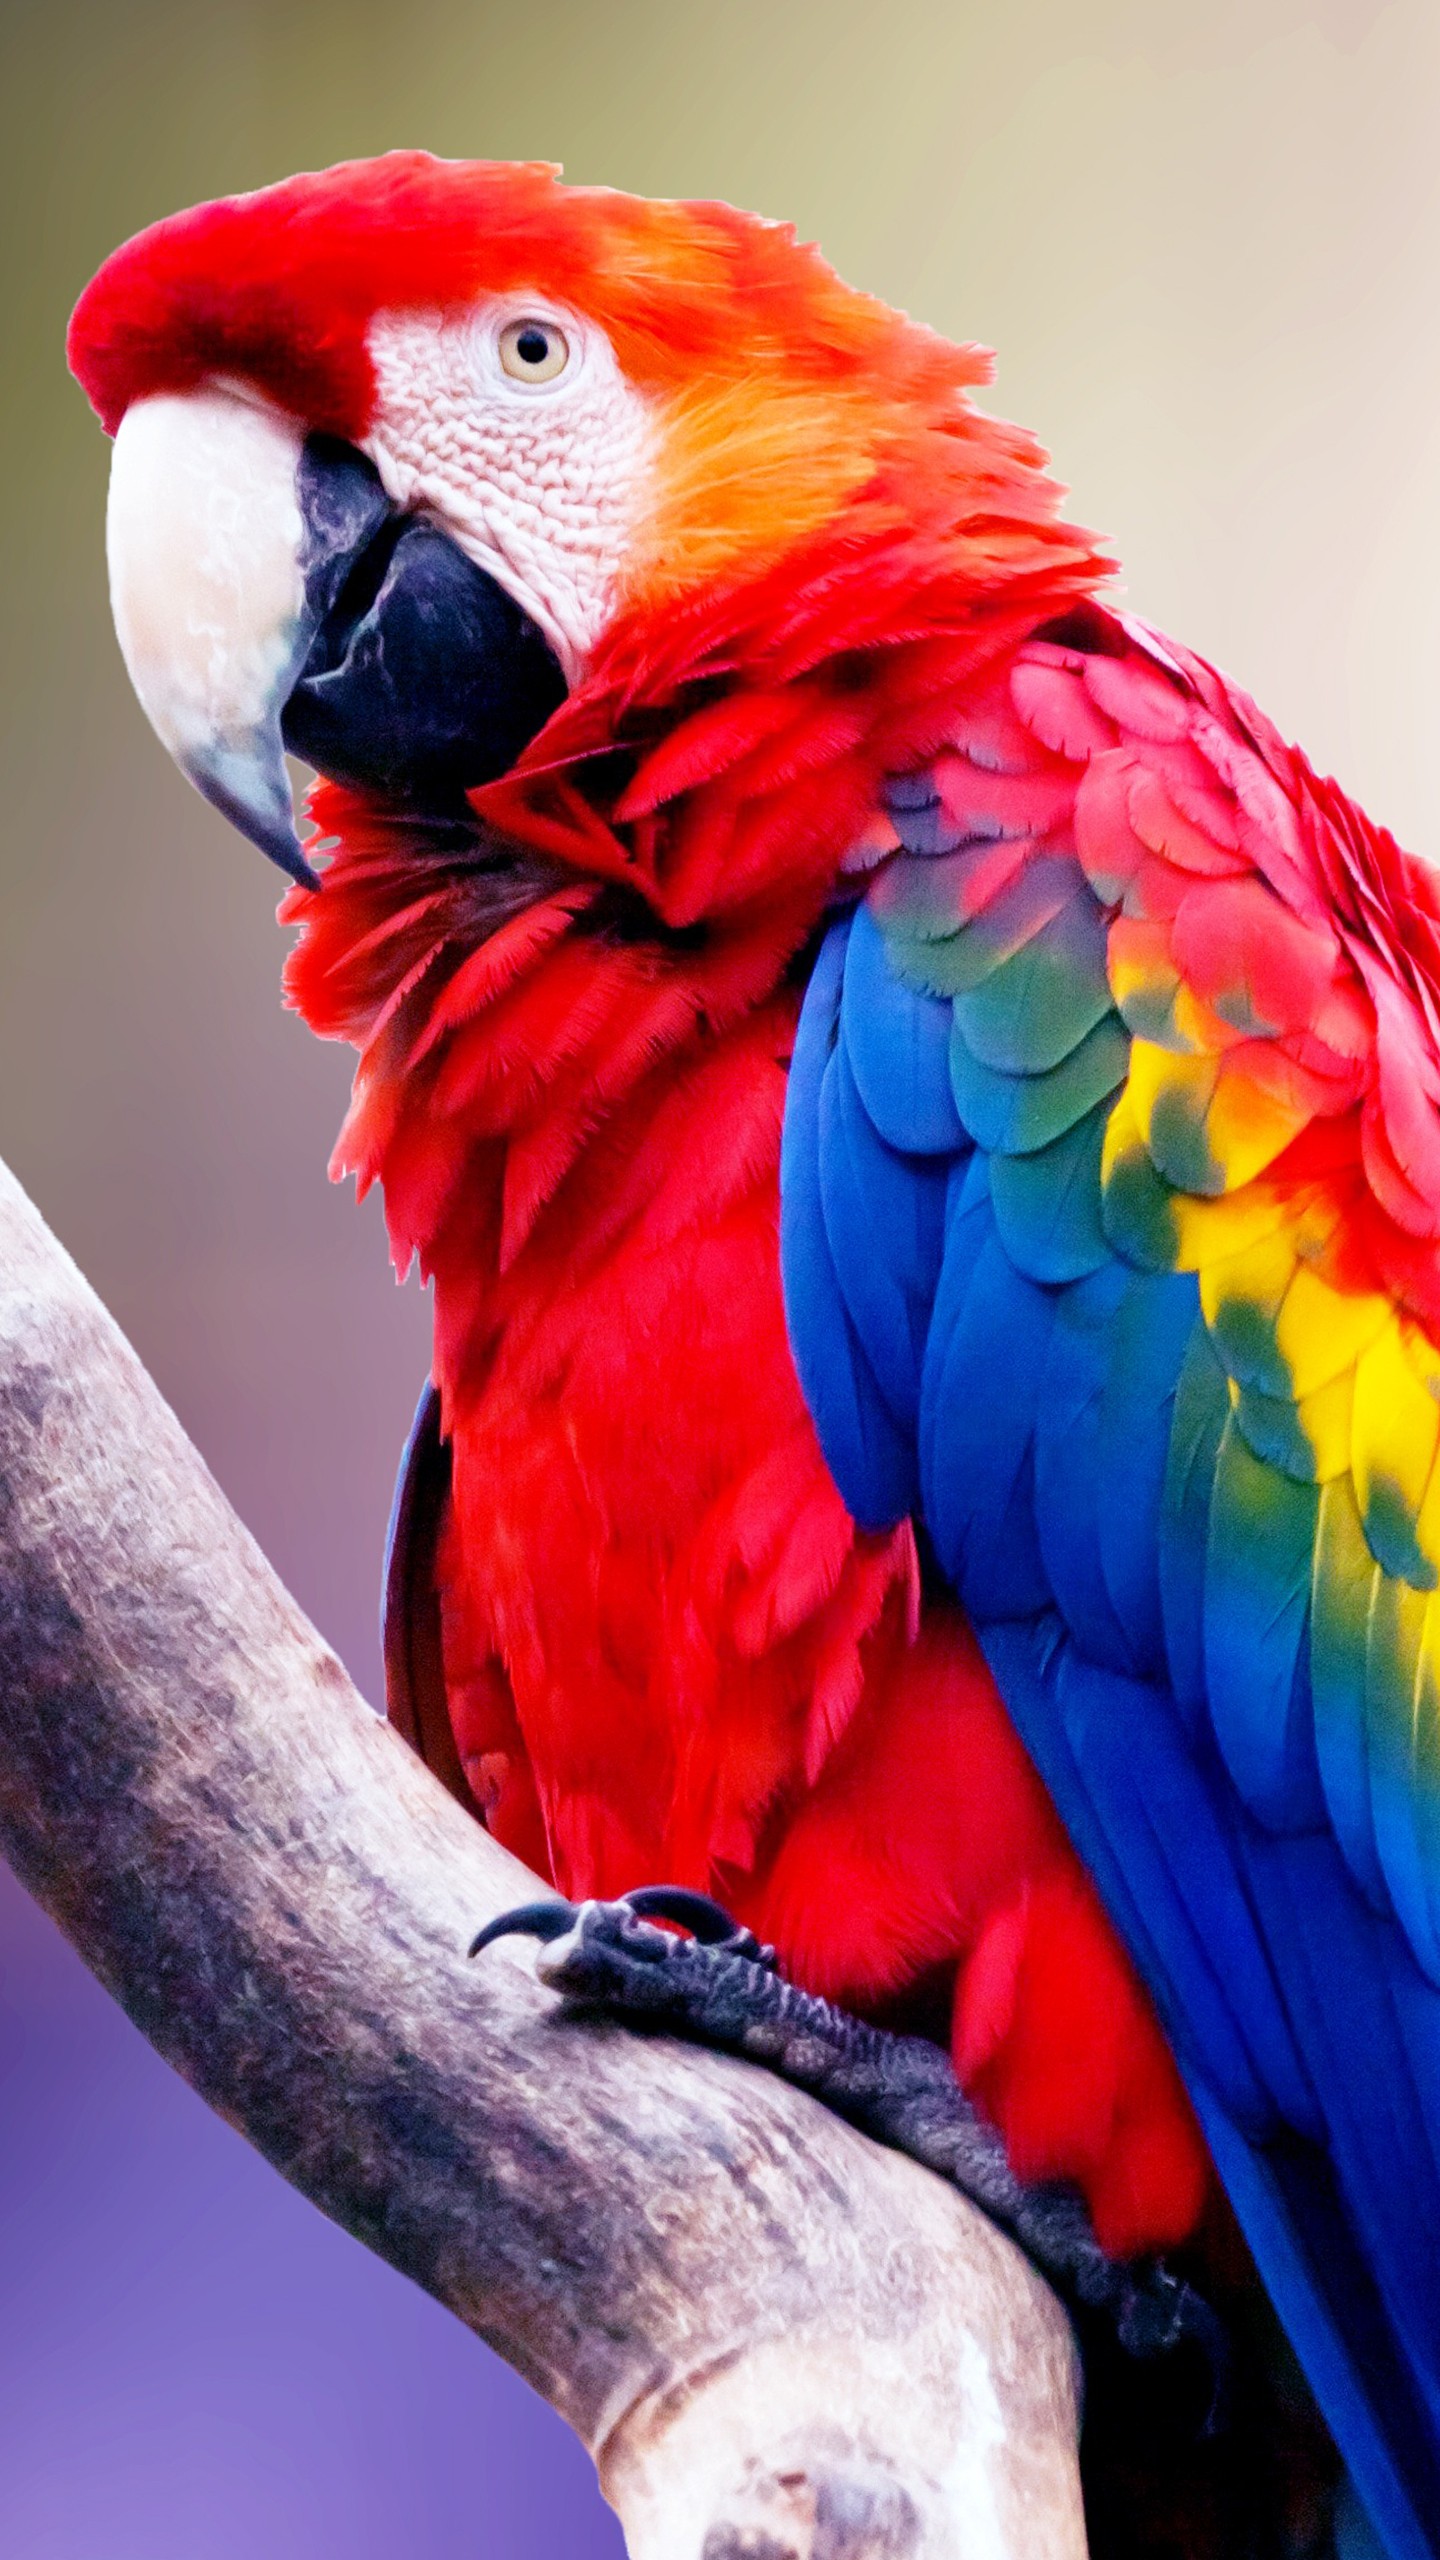 Macaw Parrot Hd Wallpaper For Mobile - 1440x2560 Wallpaper 